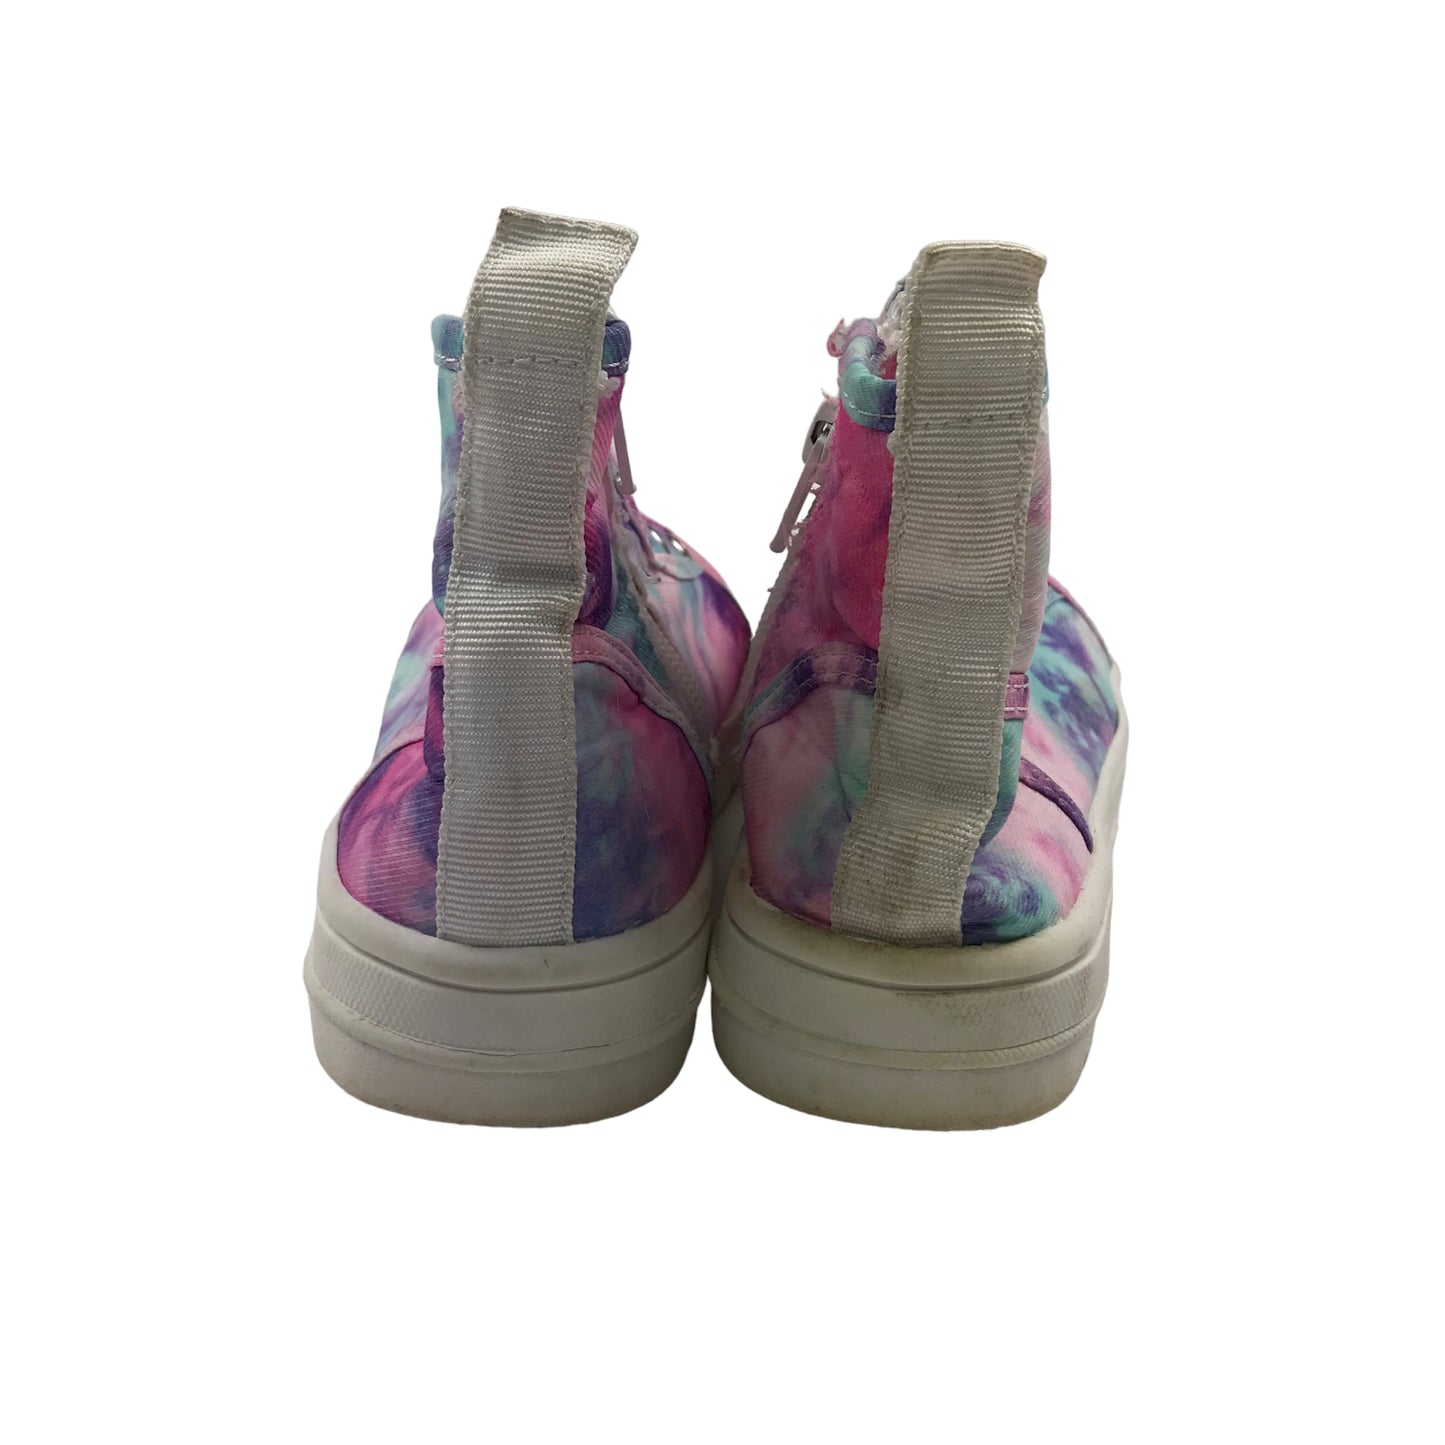 Tu Pink and Blue Tie Dye High Tops Trainers Shoe Size 10 junior